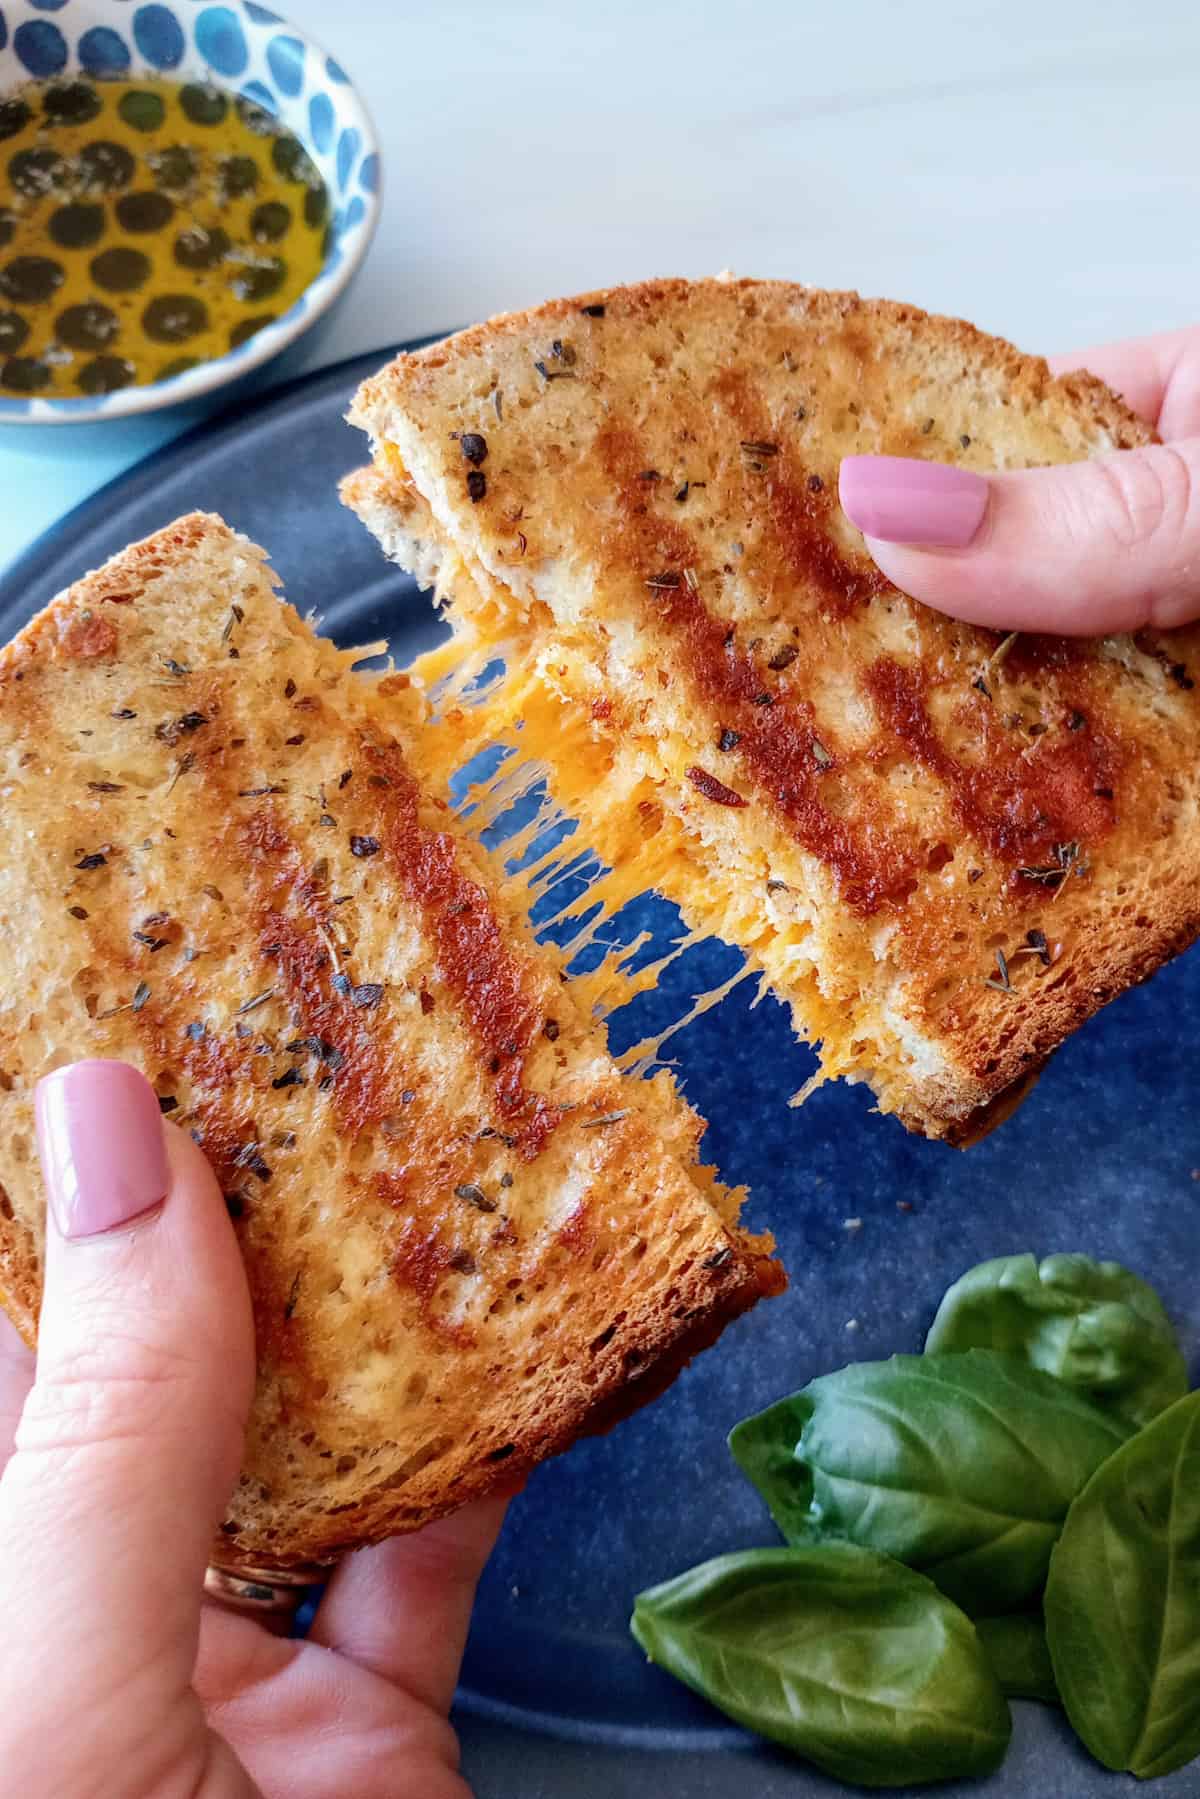 Grilled cheese with Sharp Cheddar cheese.